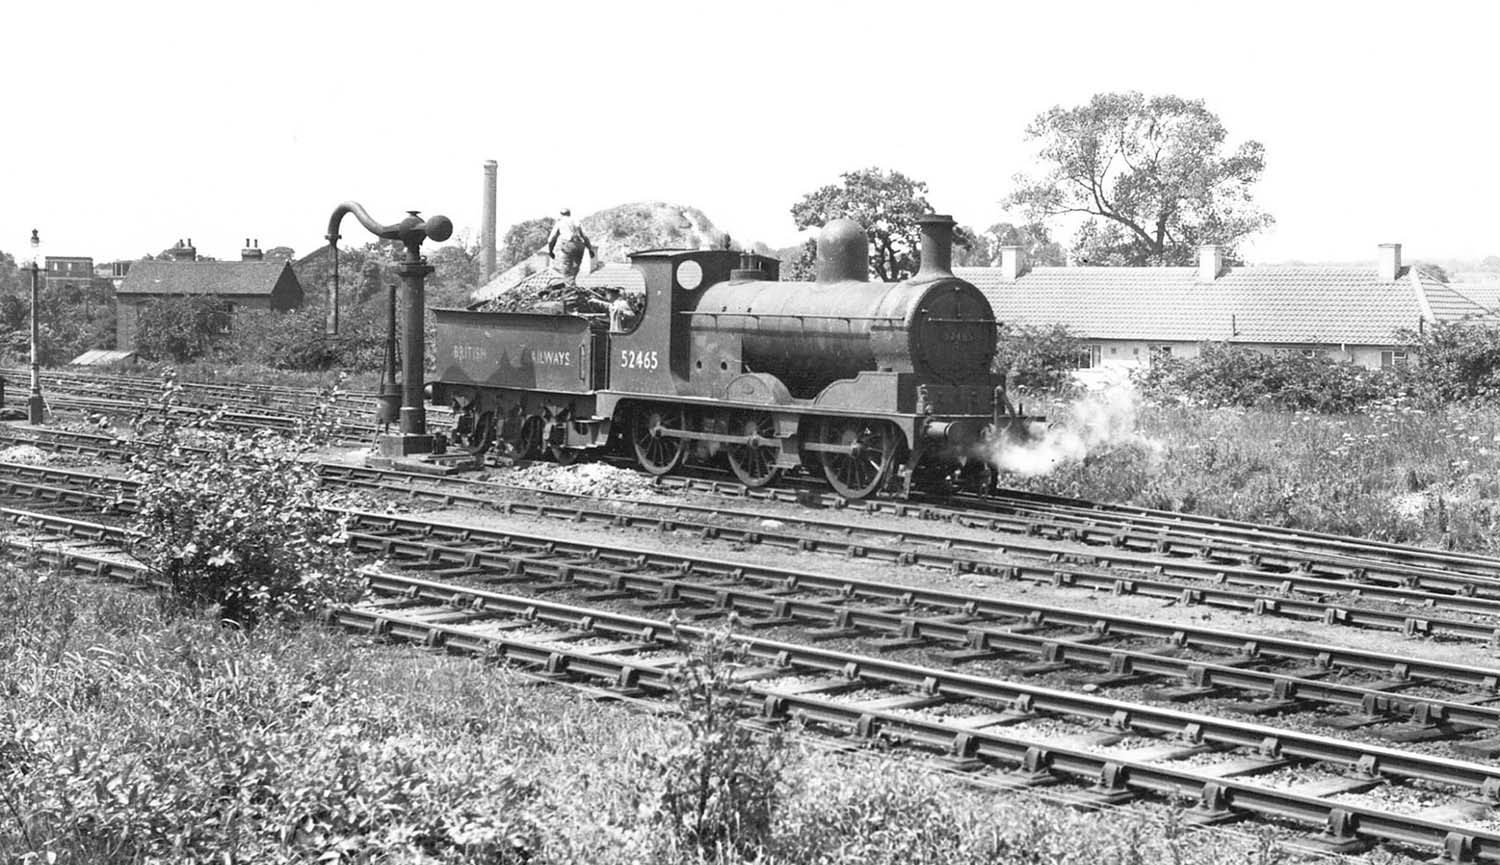 Ex-L&Y 0-6-0 No 52465 stands by the water crane during shunting duties in Stockingford marshalling yard circa 1950